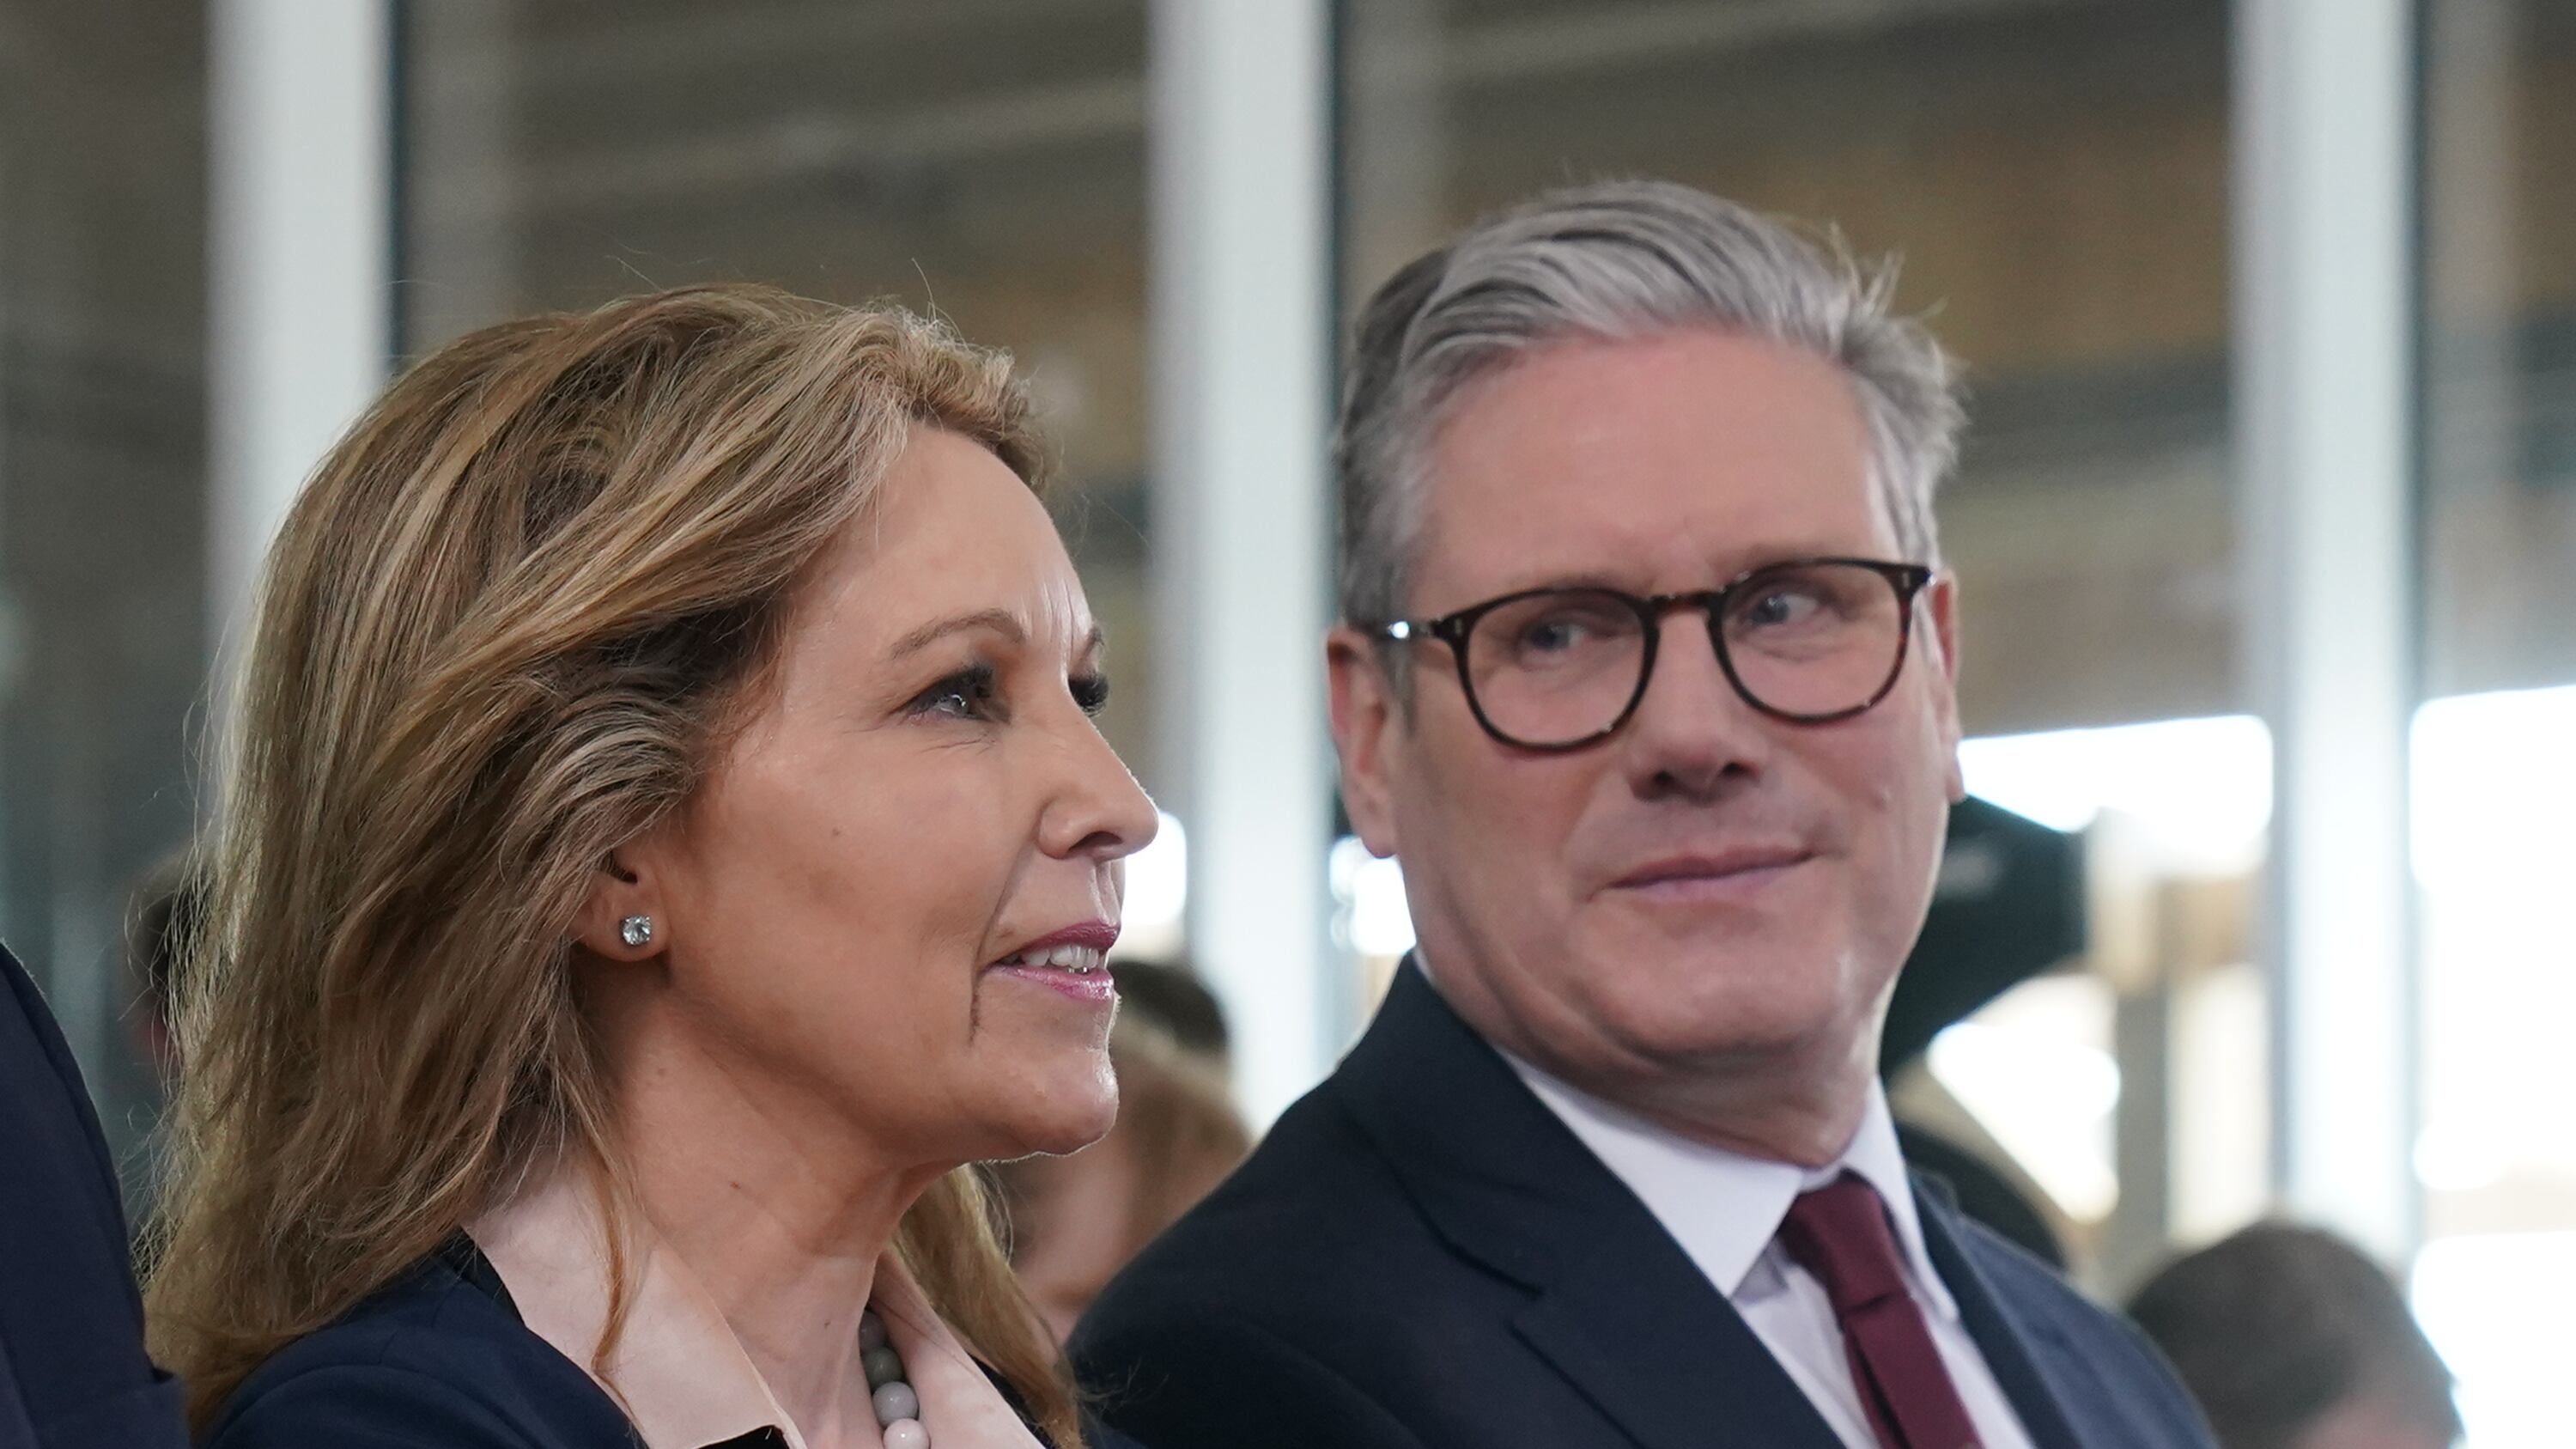 Labour Party leader Sir Keir Starmer with new Labour MP Natalie Elphicke